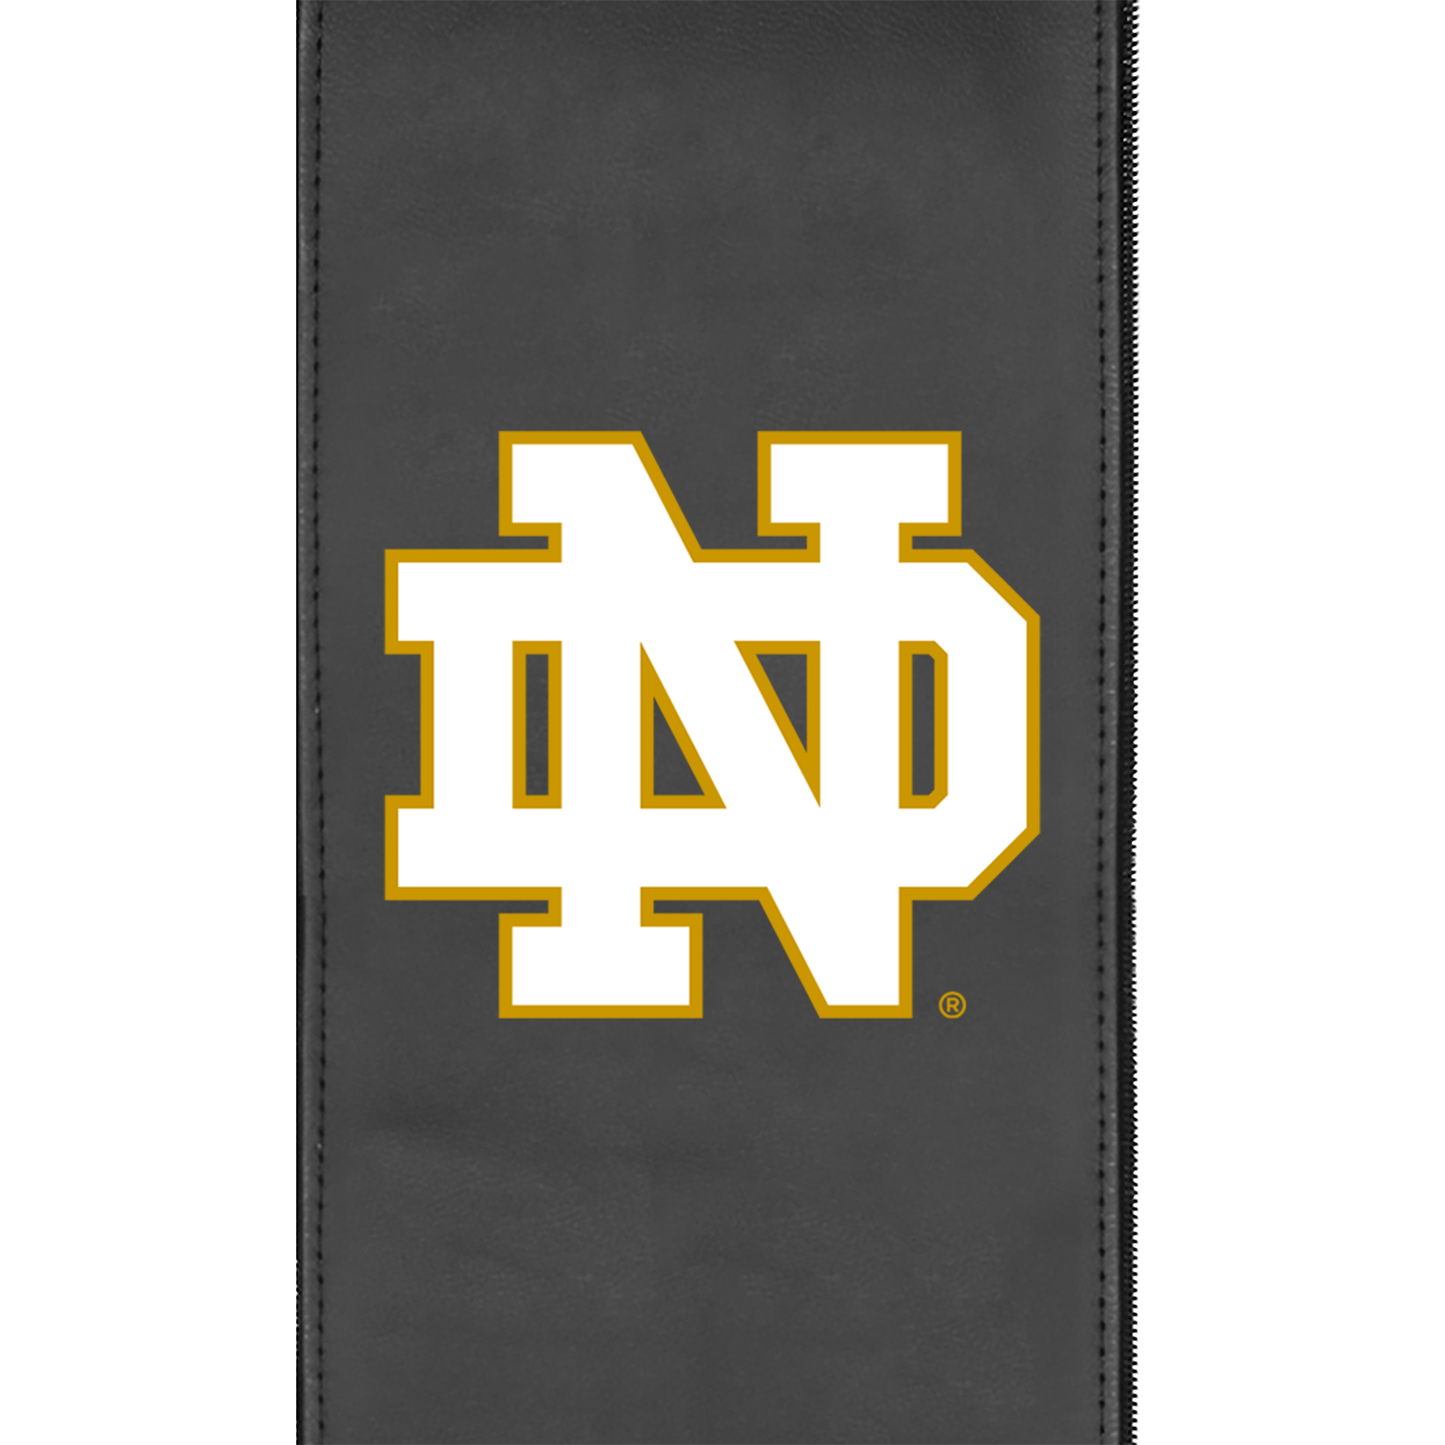 Relax Home Theater Recliner with Notre Dame Secondary Logo